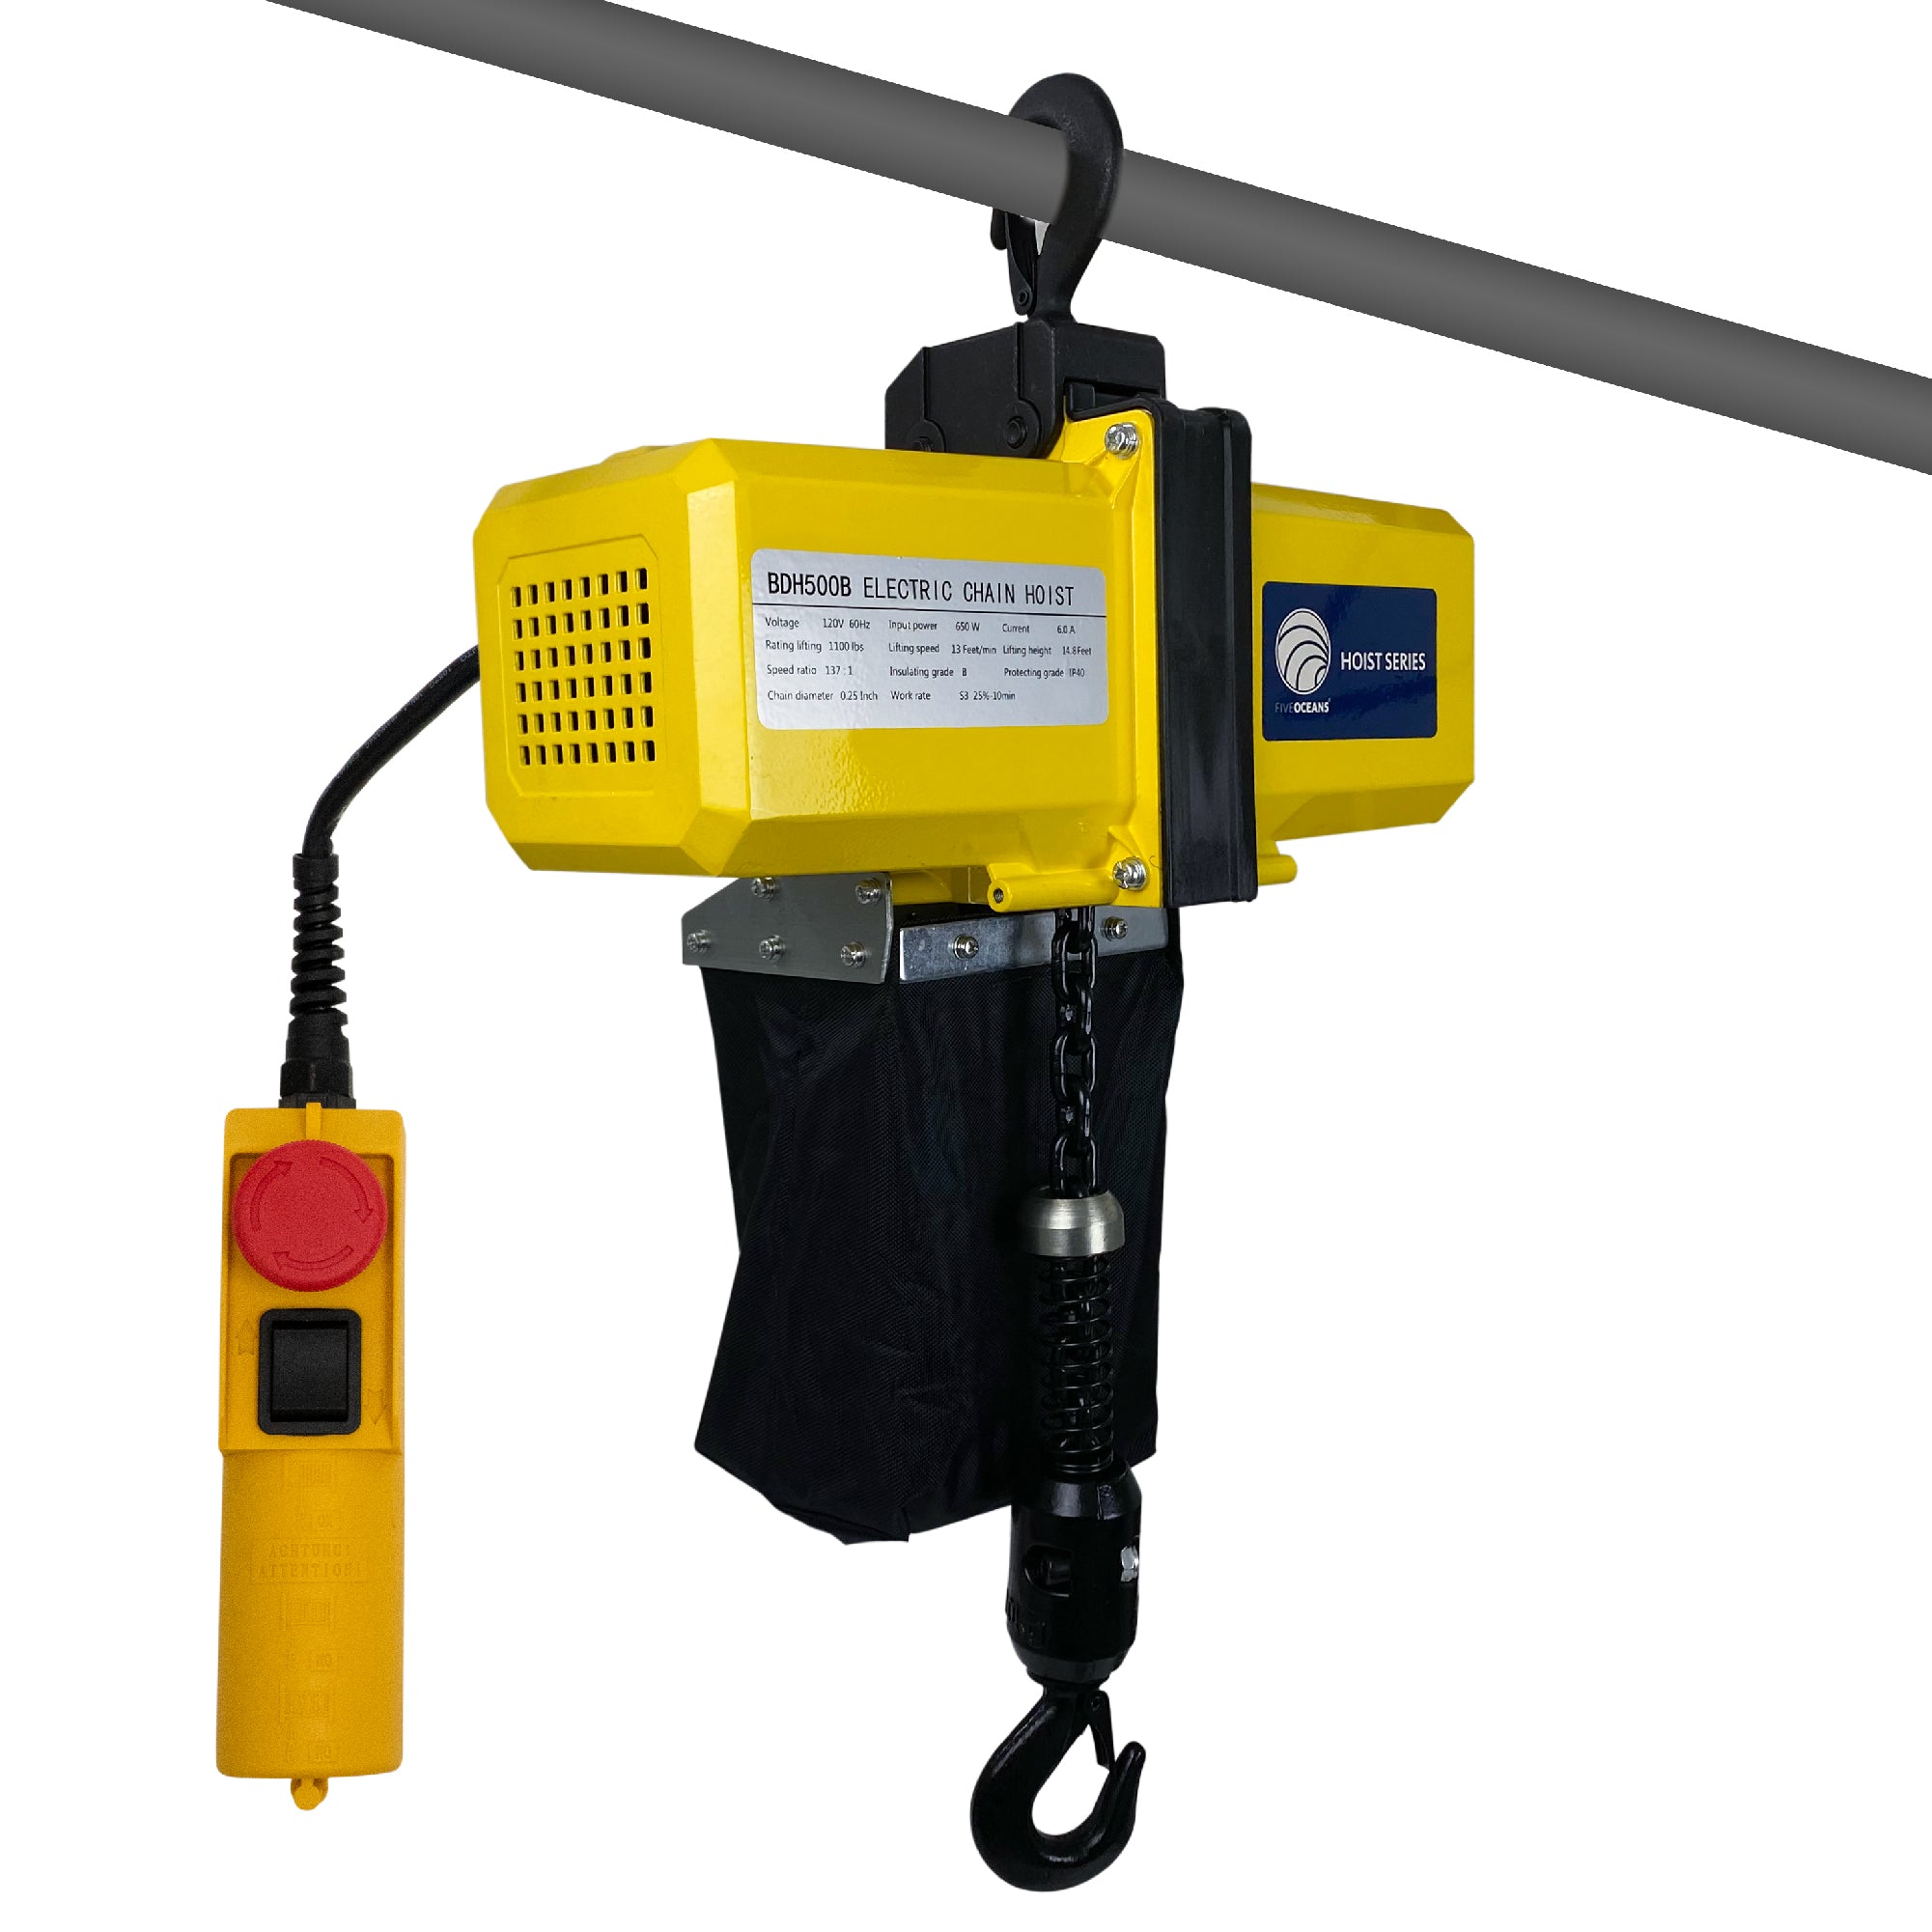 Electric Chain Hoist, 1100LBS / 500KG,  6 FT Remote Control, 120 V - FO4335